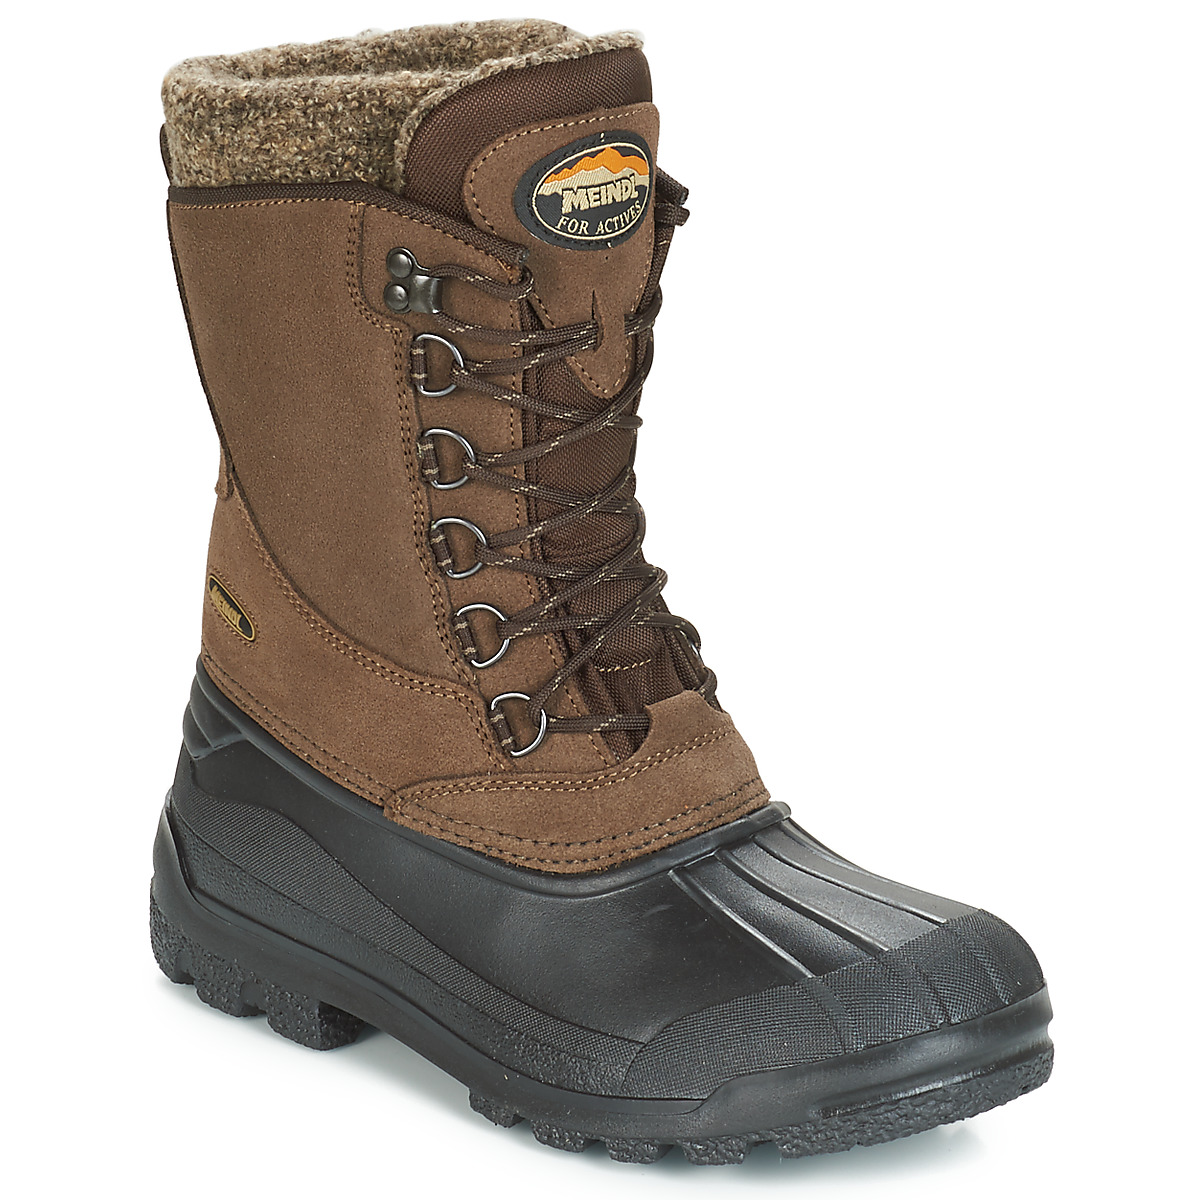 Normal promotion Completely dry Meindl SOLDEN Brown - Free delivery | Spartoo NET ! - Shoes Snow boots  Women USD/$122.40